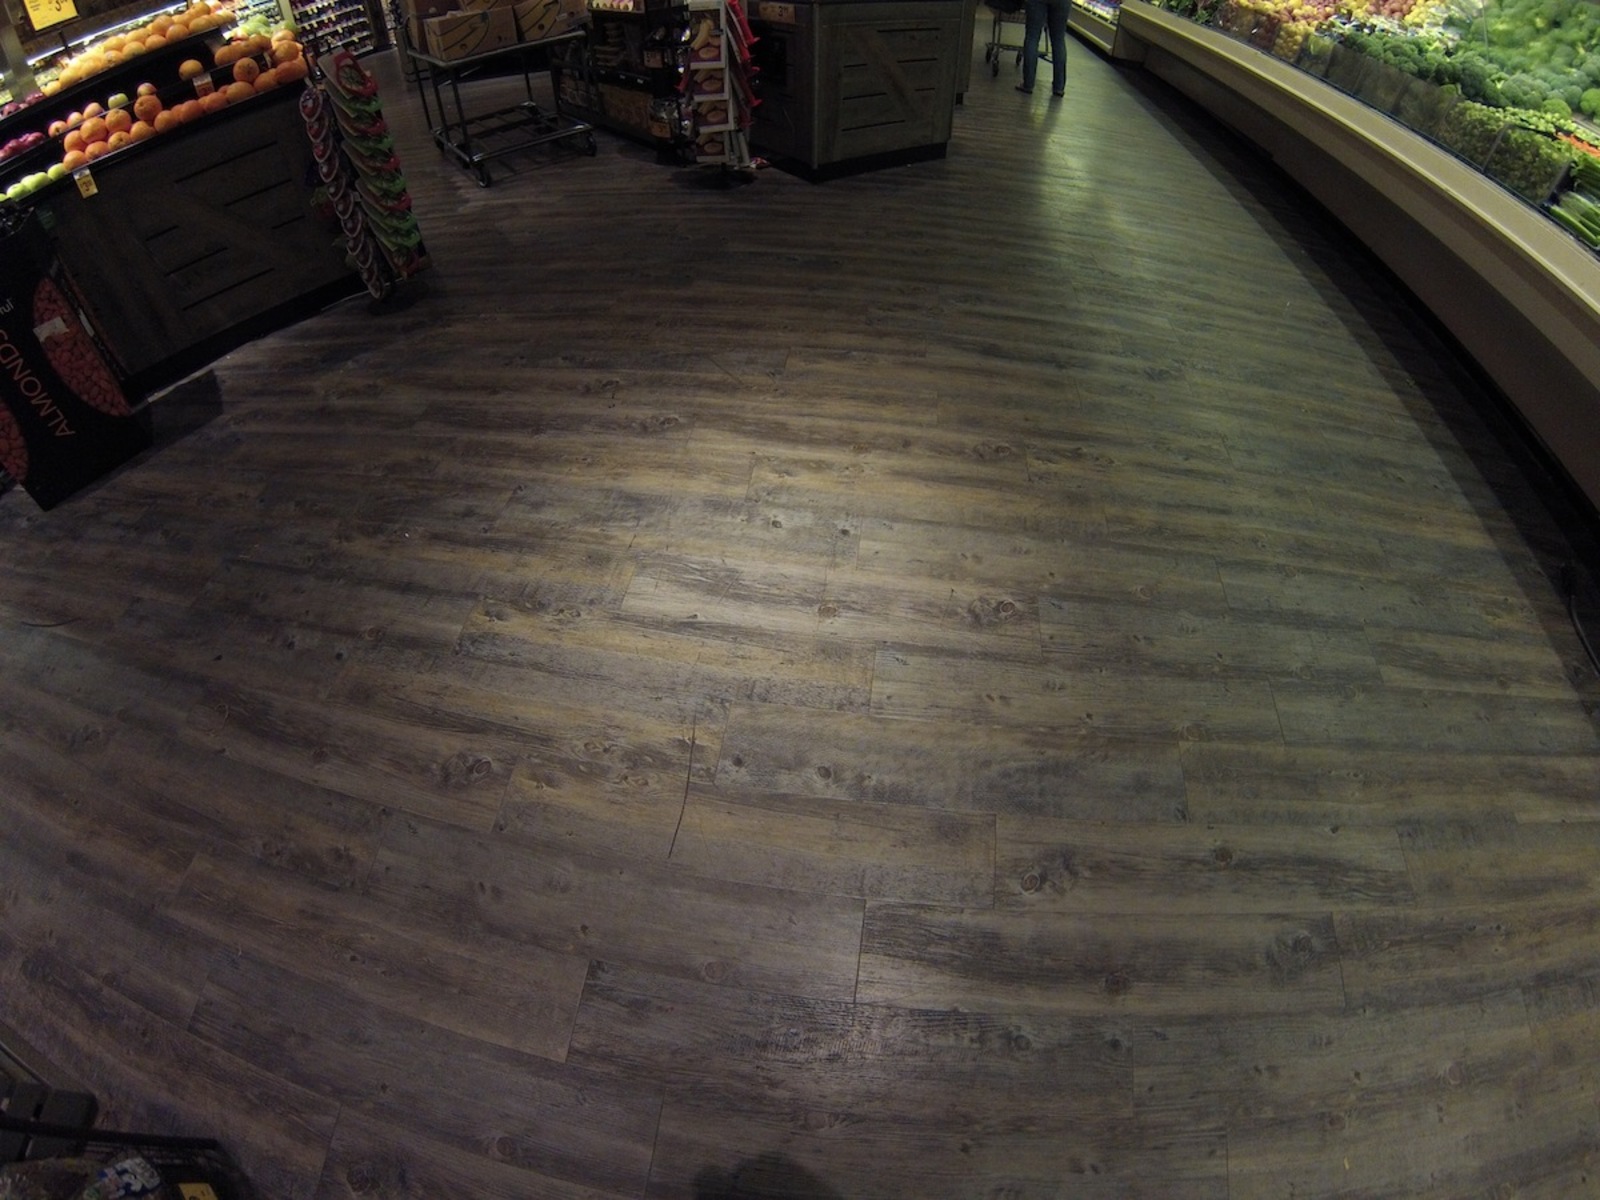 Light shining on floor at grocery store